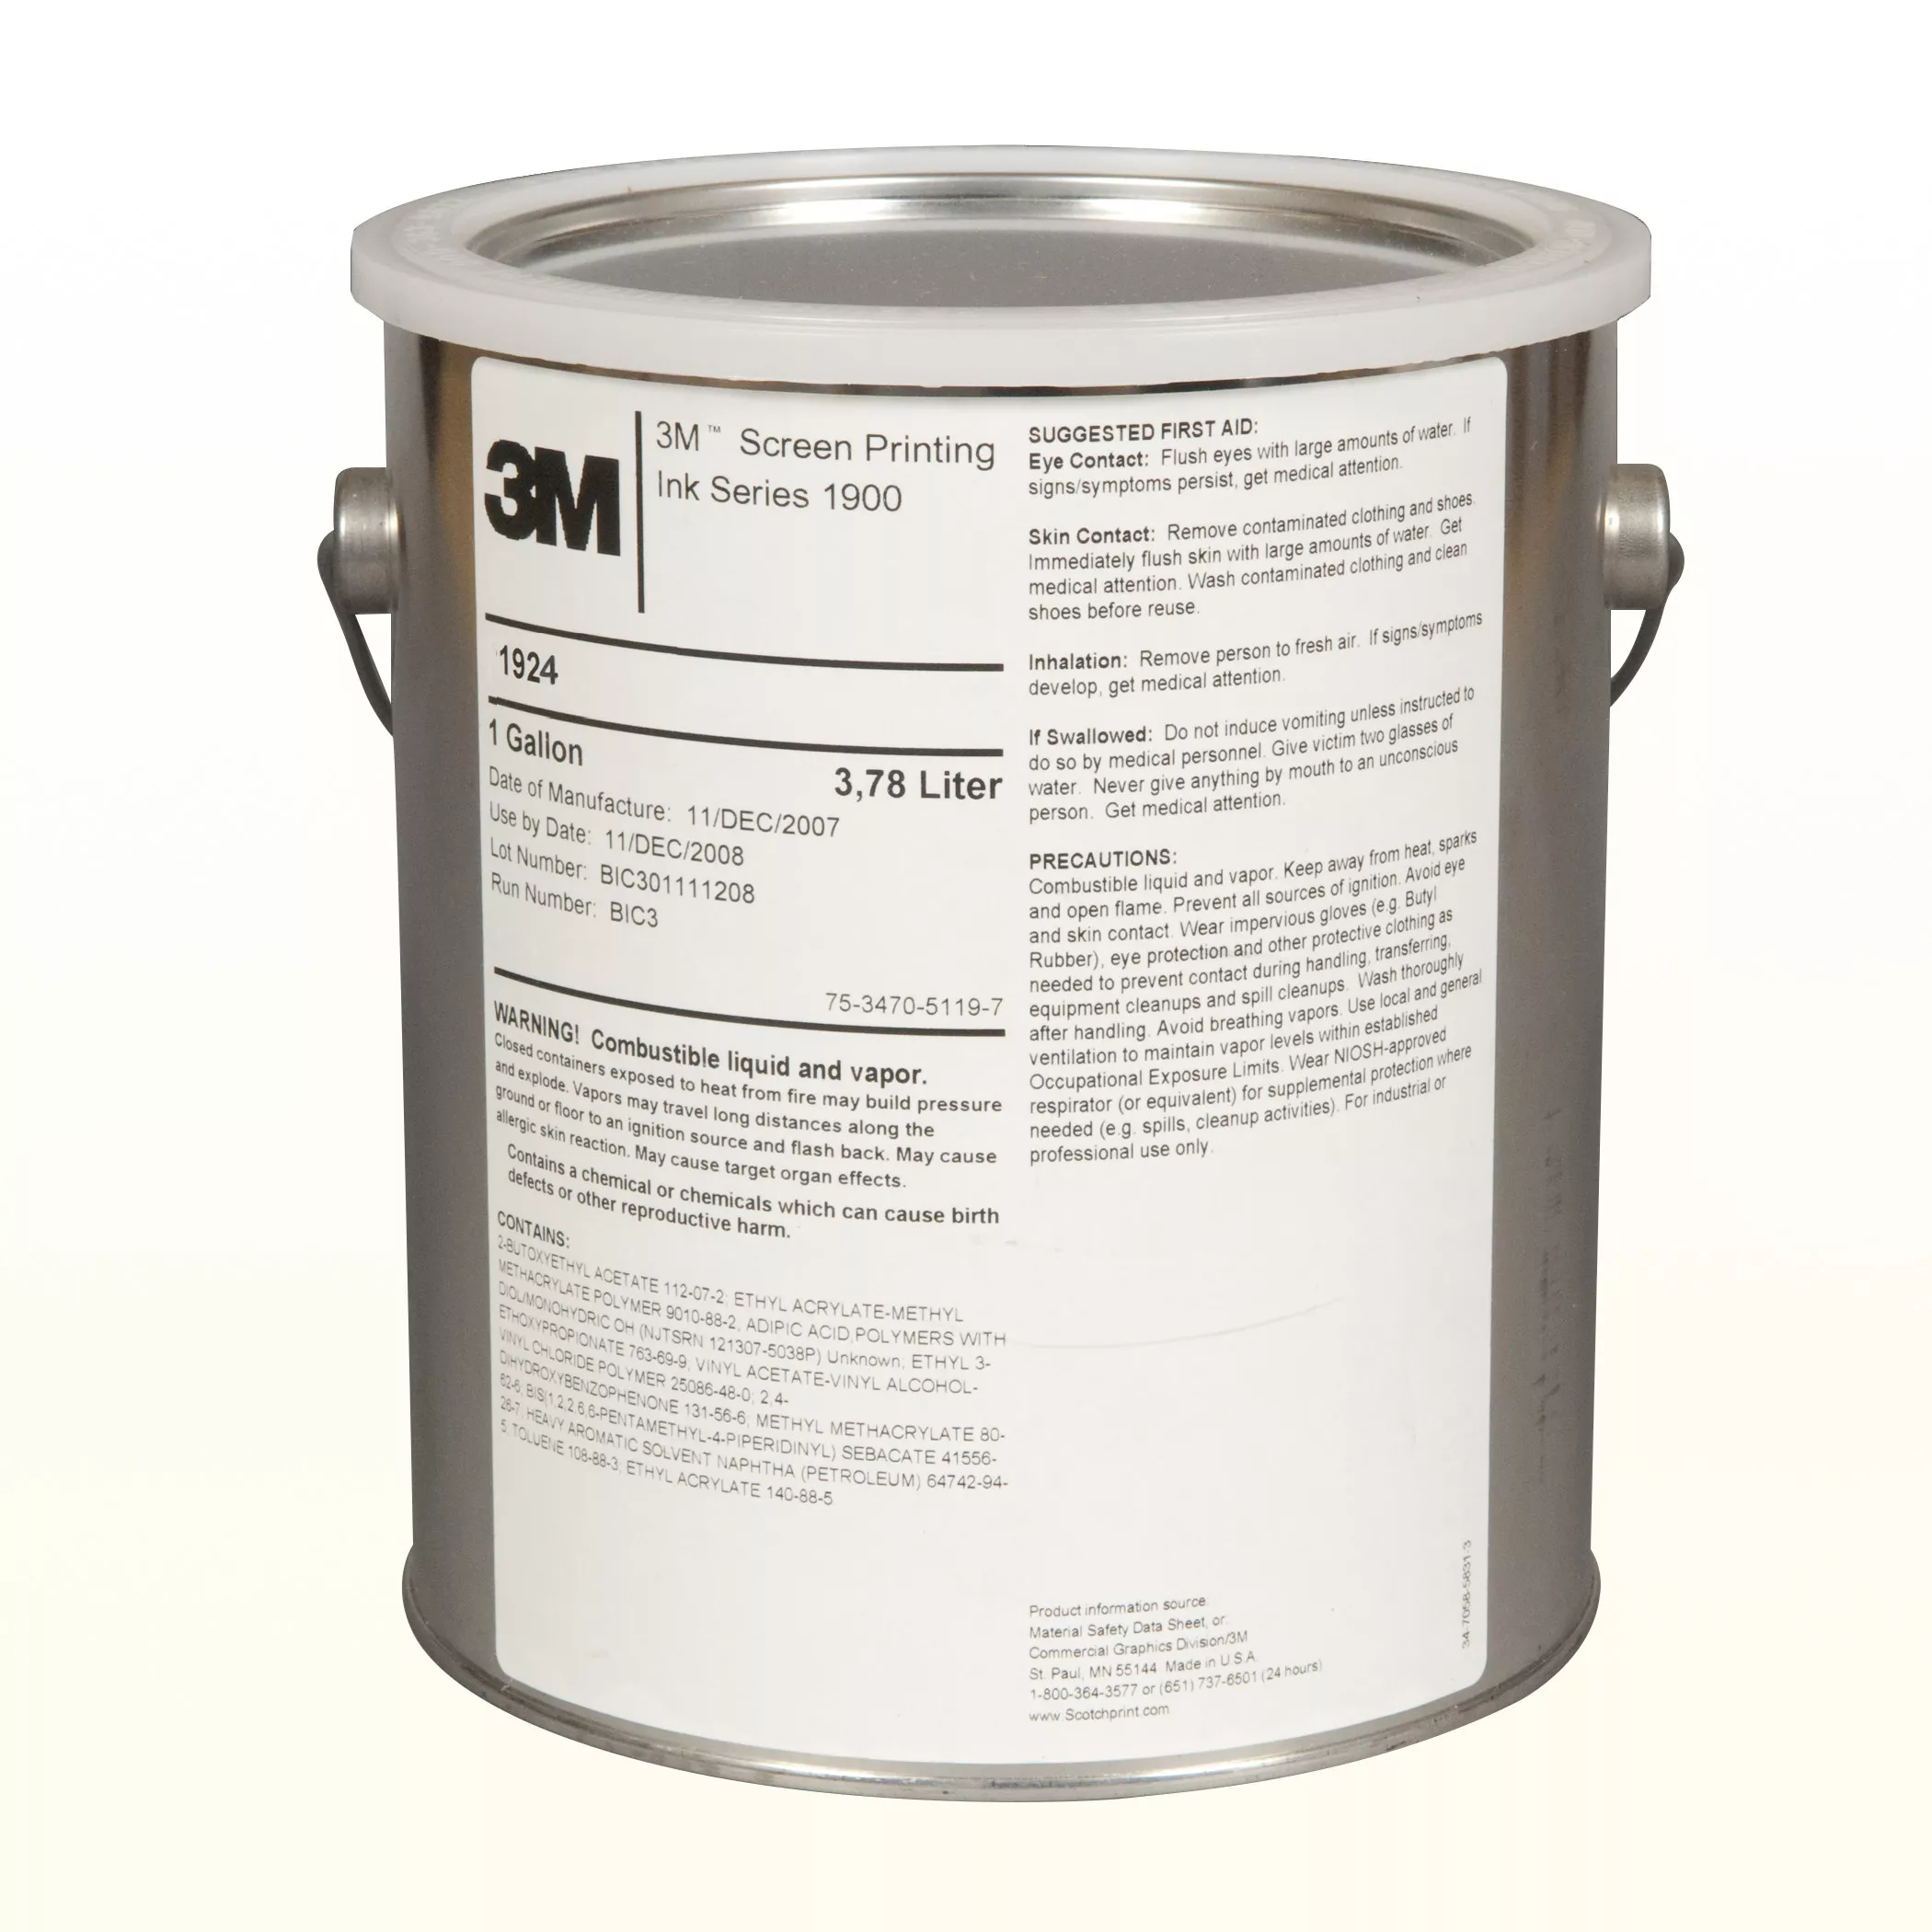 3M™ Screen Printing Ink 1924, Light Green, 1 Gallon Container